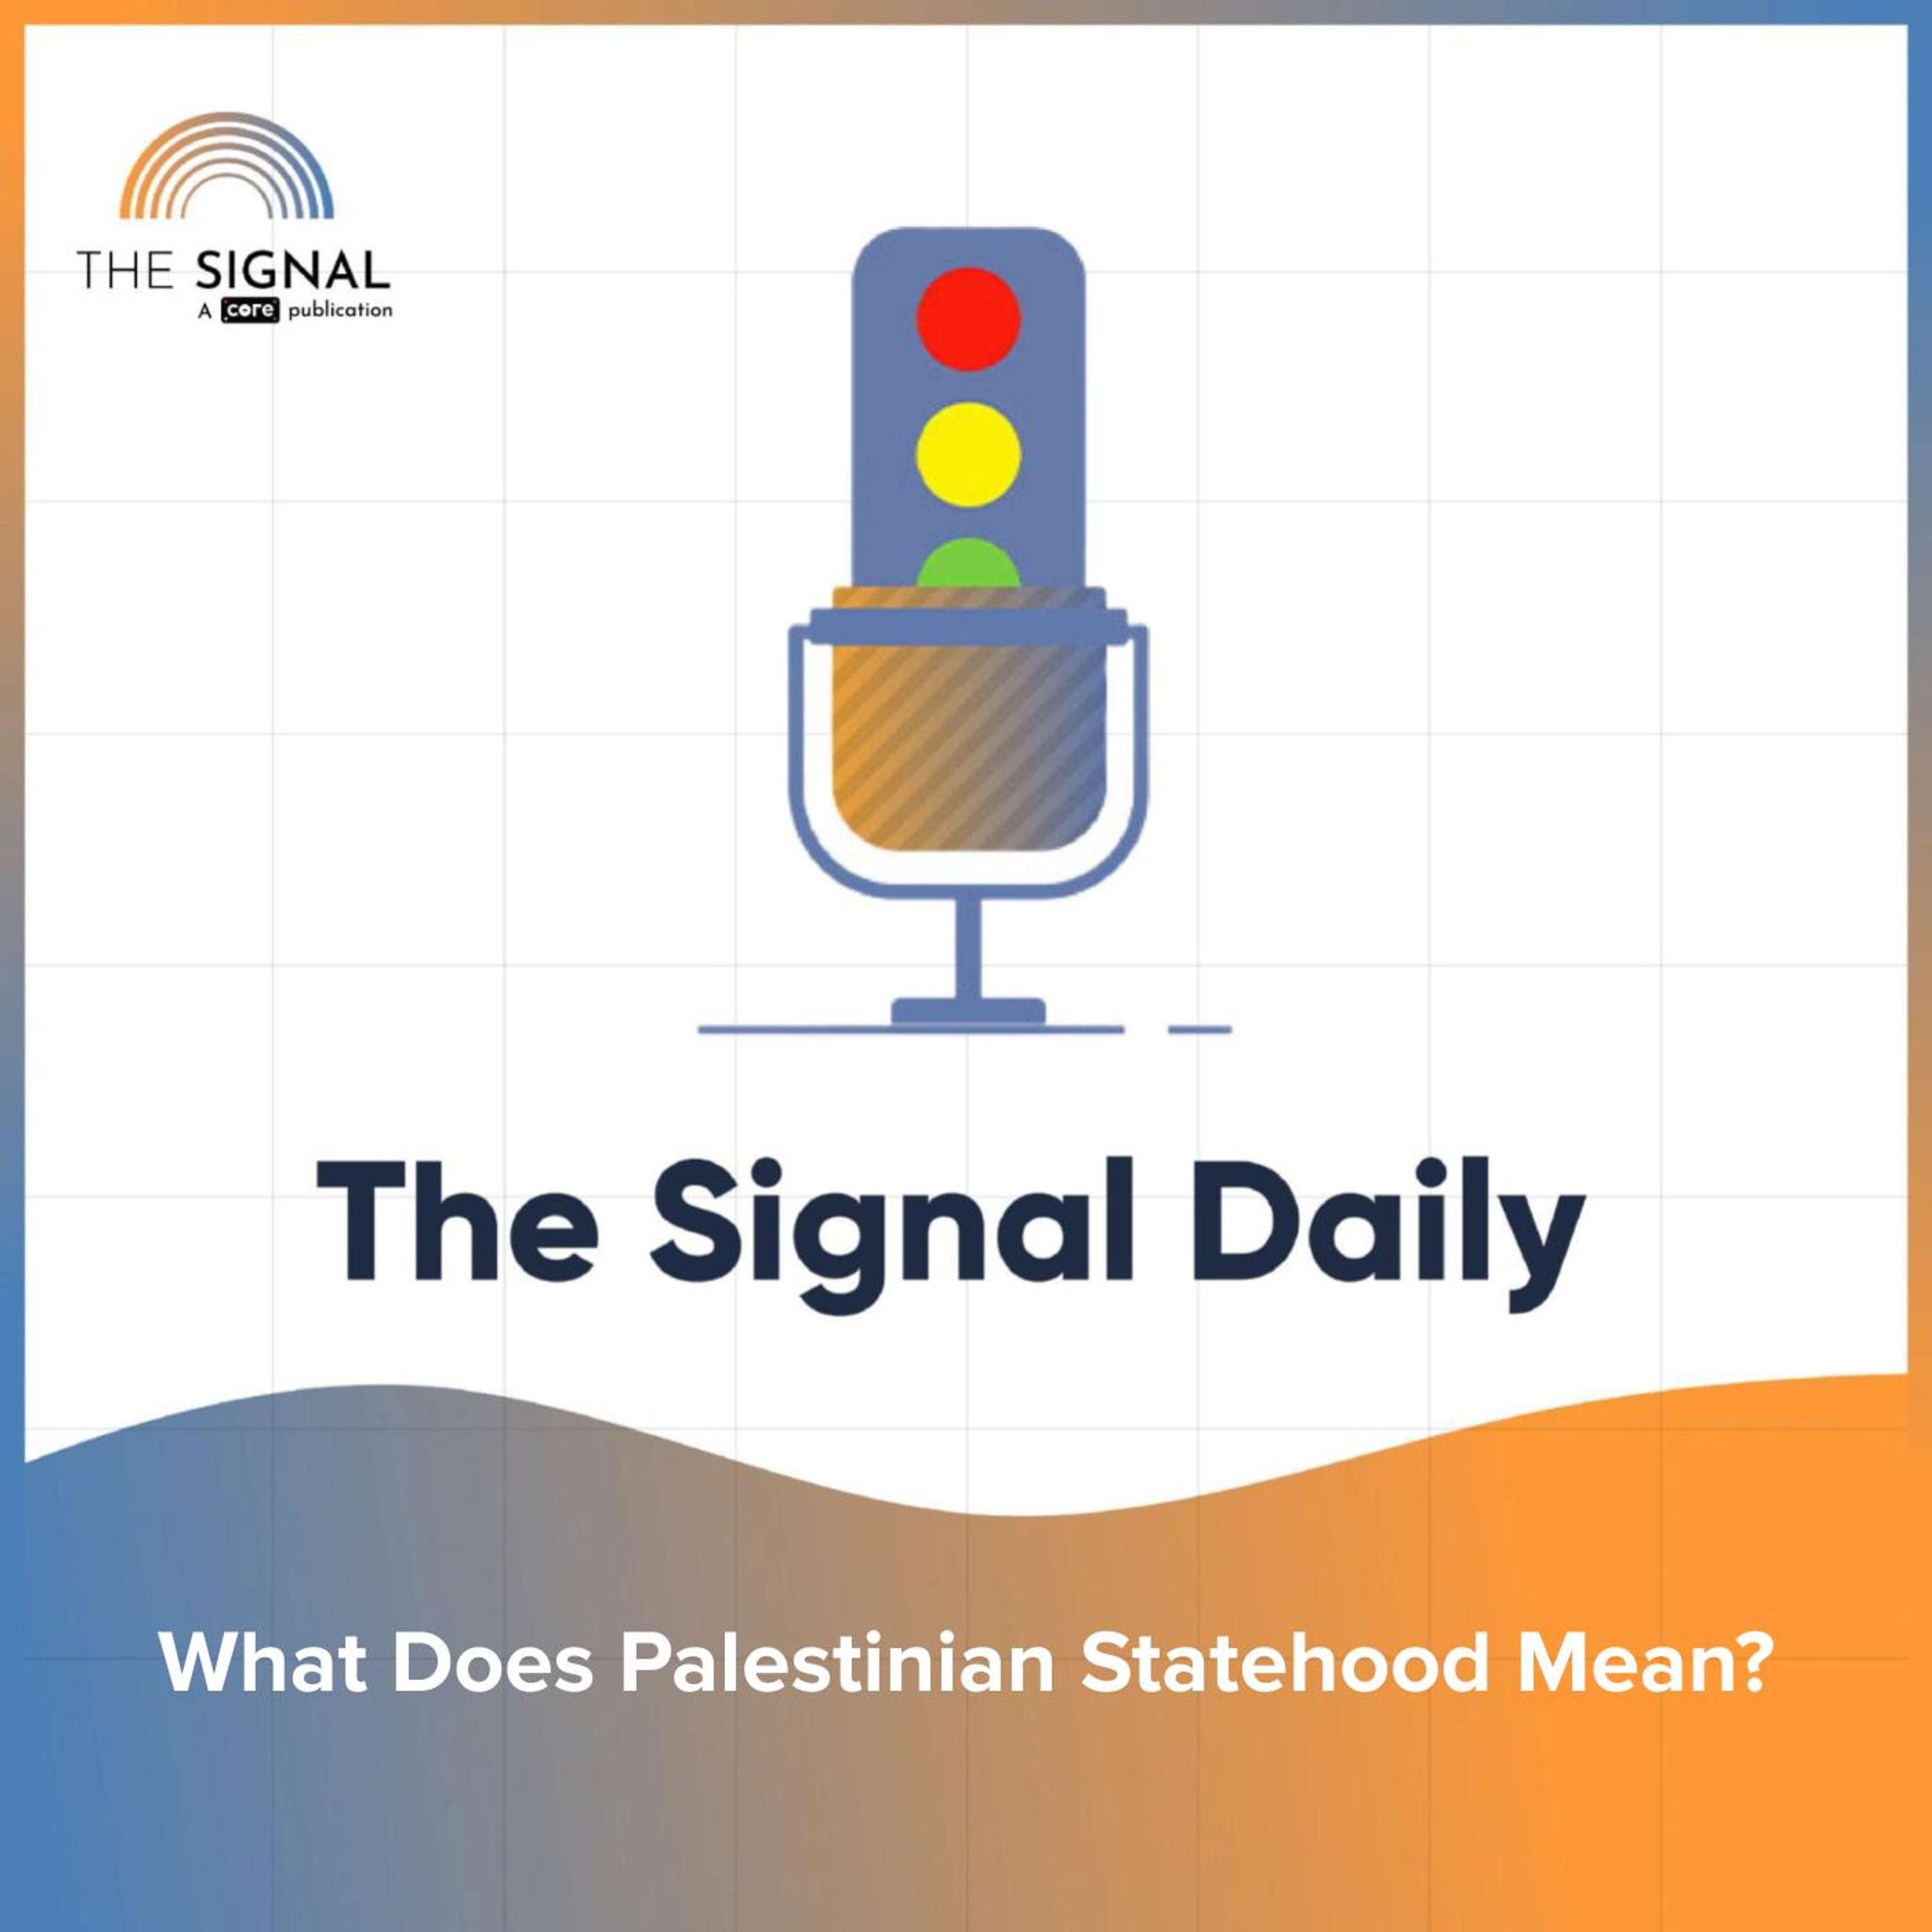 What Does Palestinian Statehood Mean?